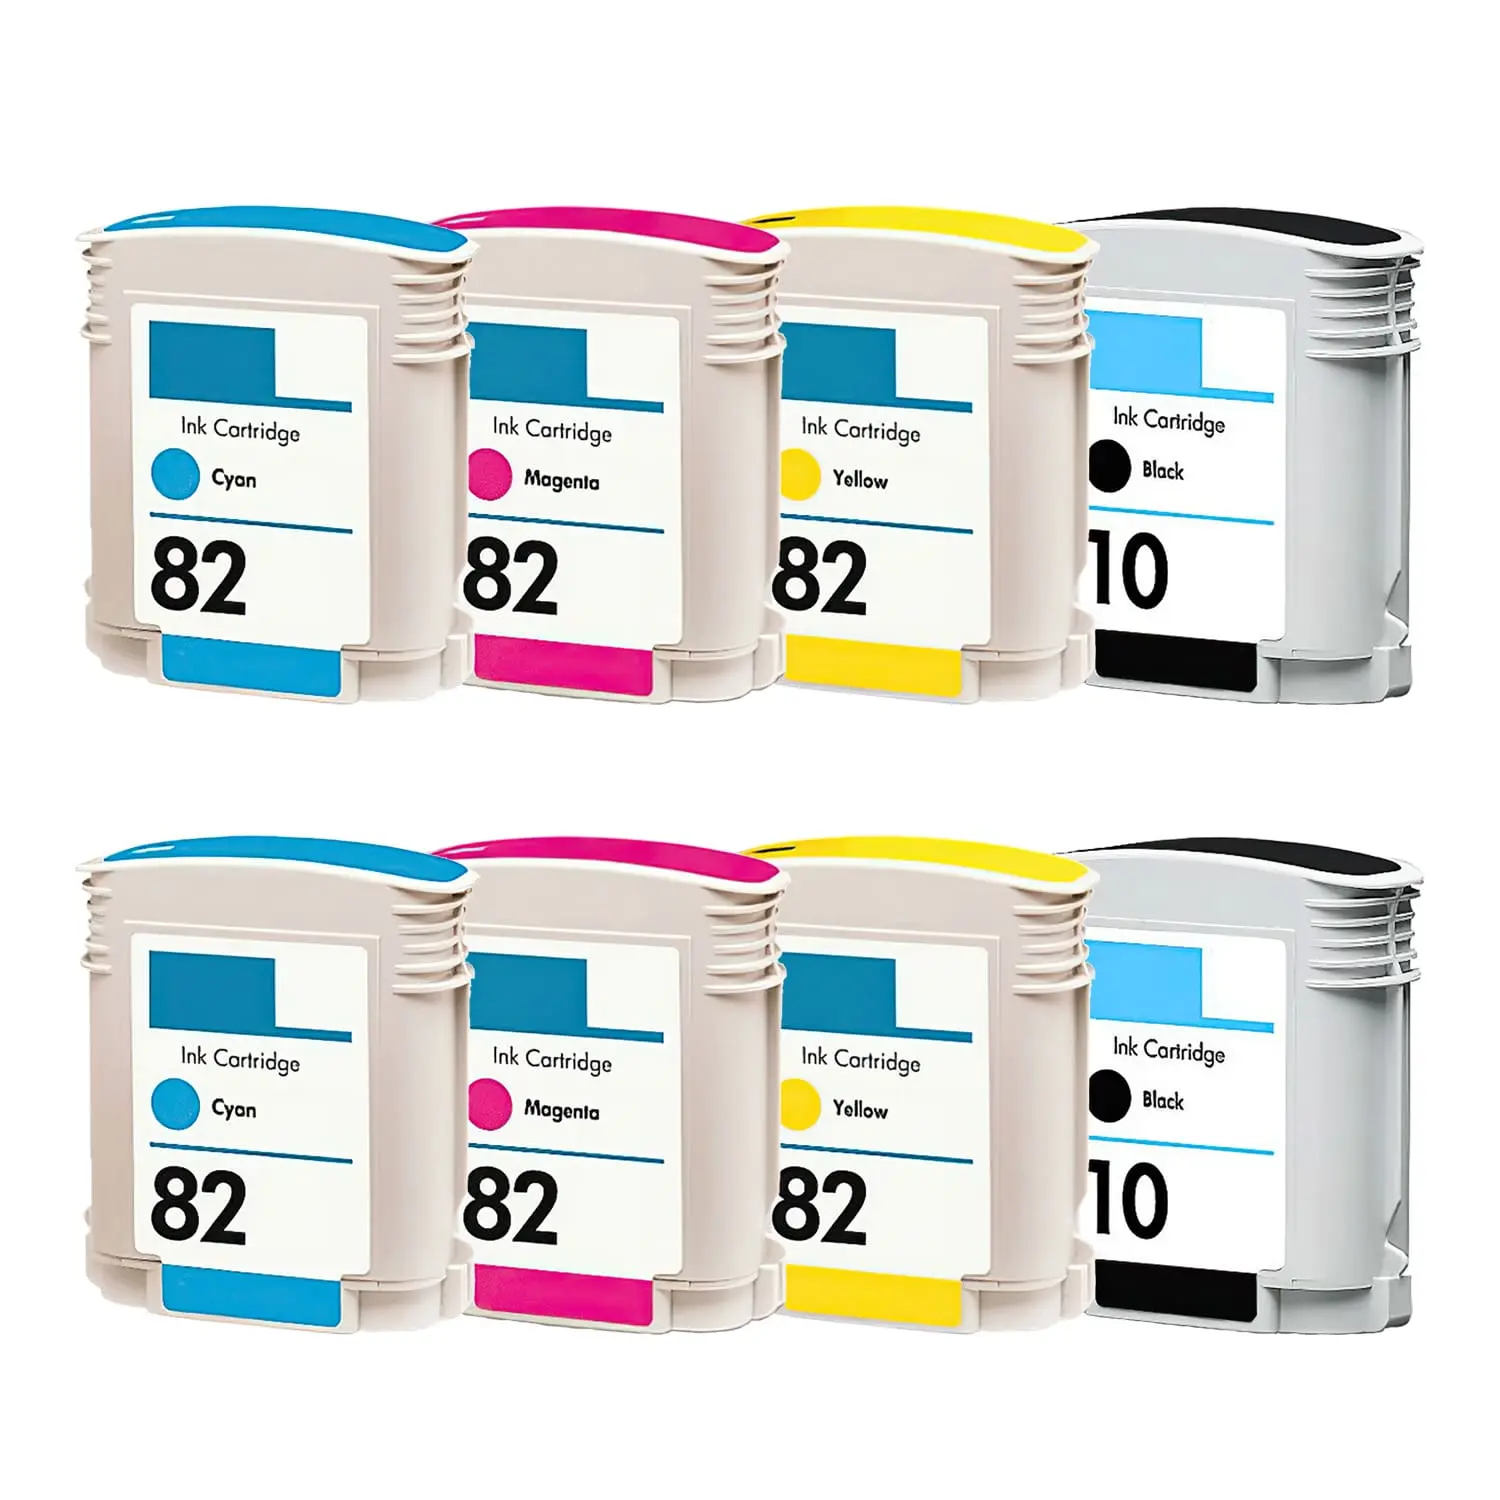 Hp designjet 500 ink: high-quality printing solutions